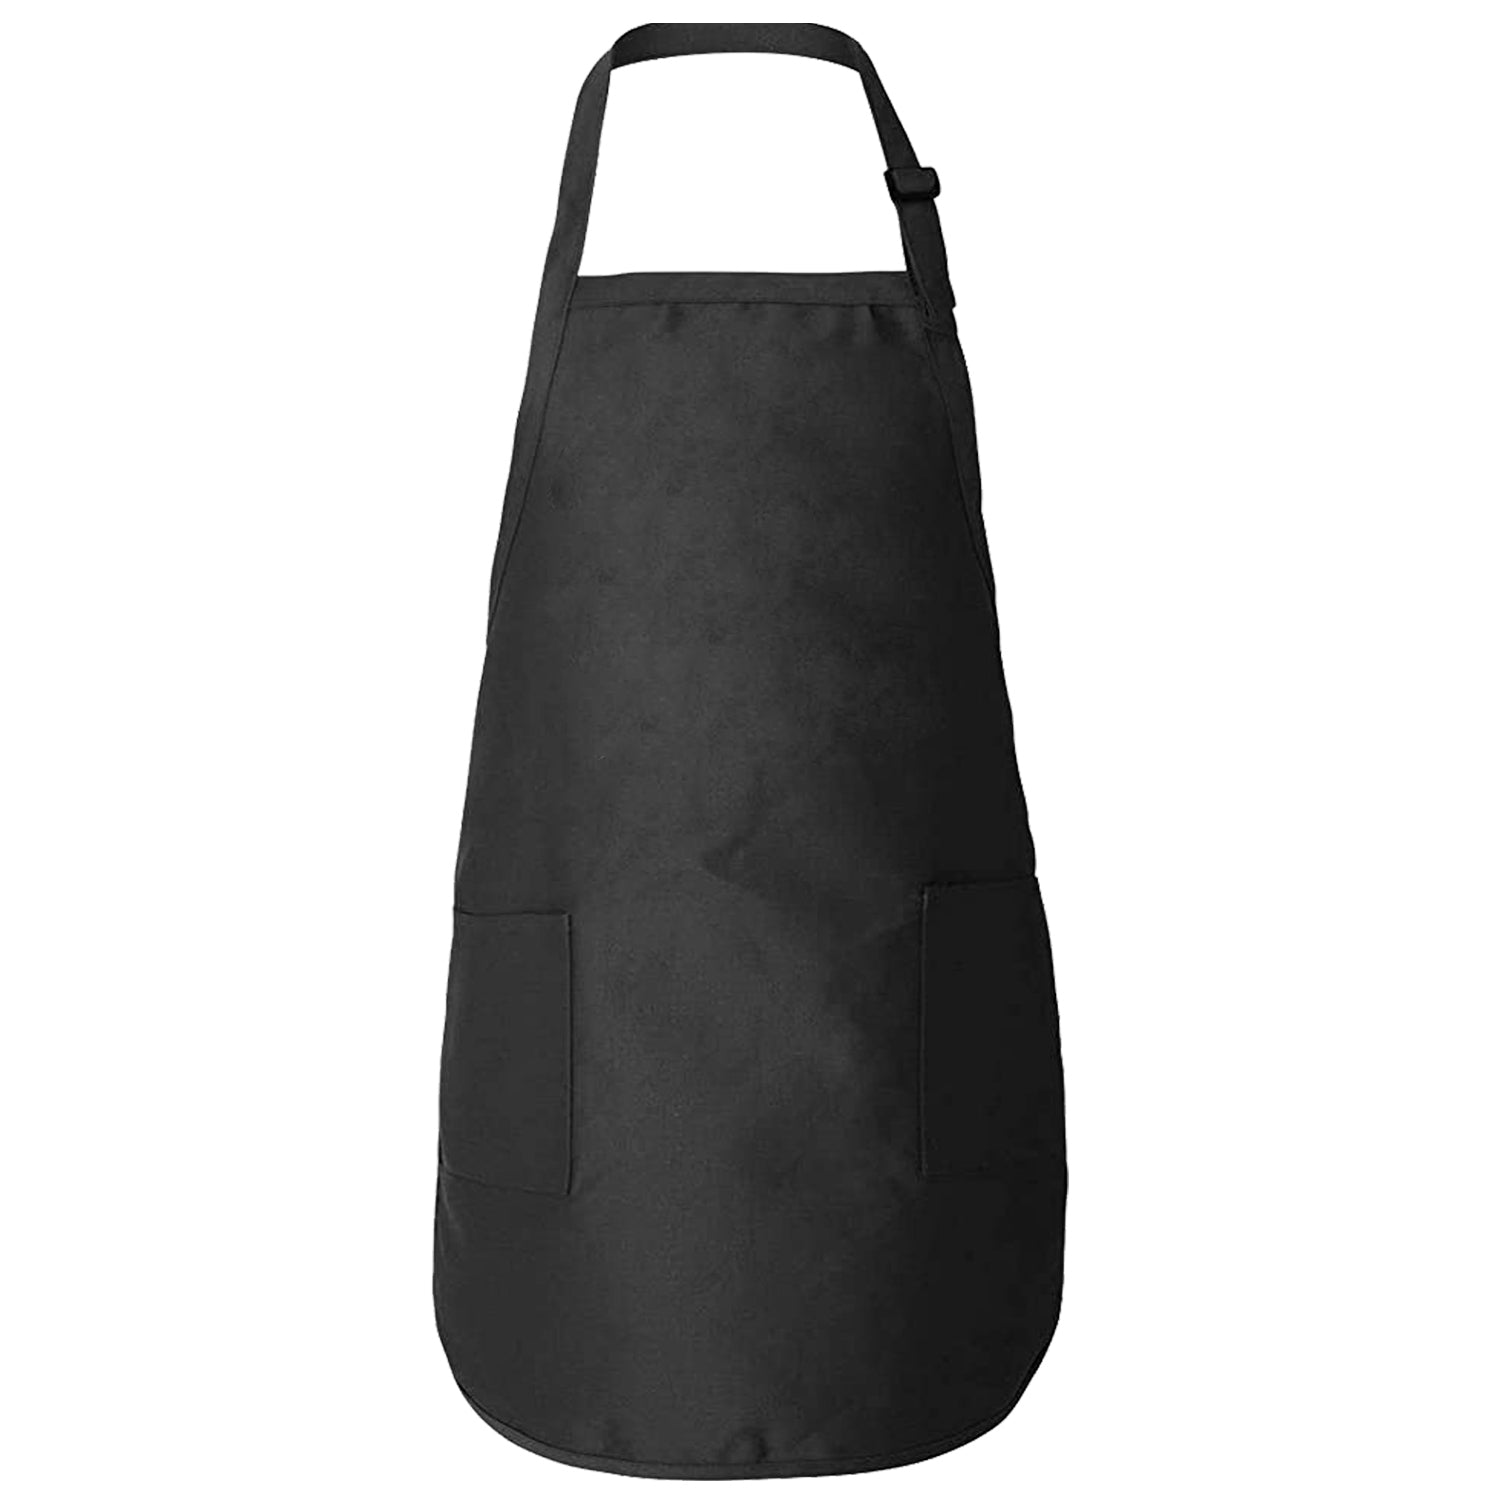 Adjustable Strap Cooking Kitchen Apron with Pockets